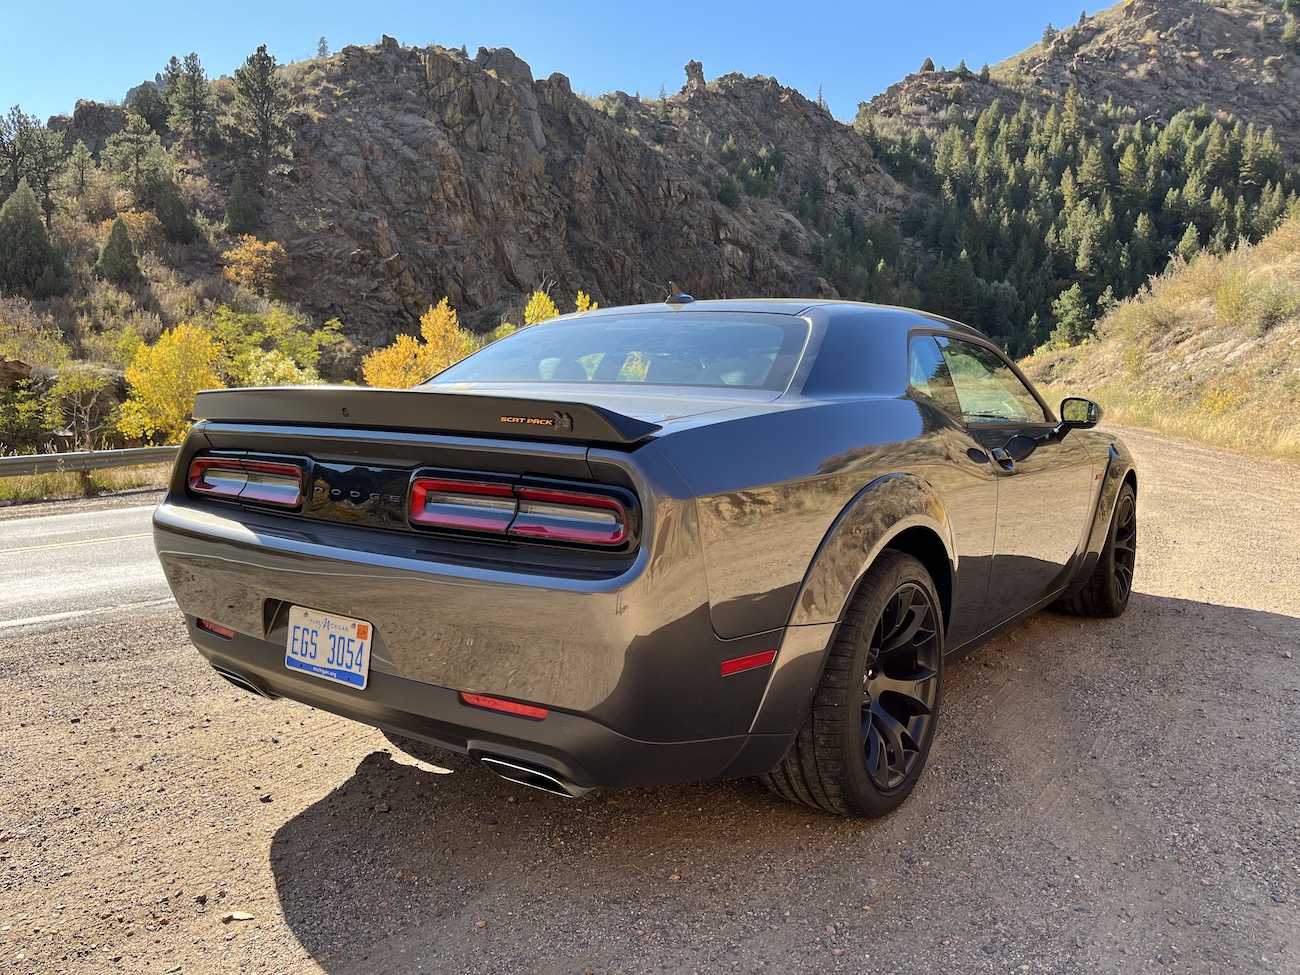 Driven: The 2022 Dodge Challenger Scat Pack Is a Buttoned-up Burnout Machine